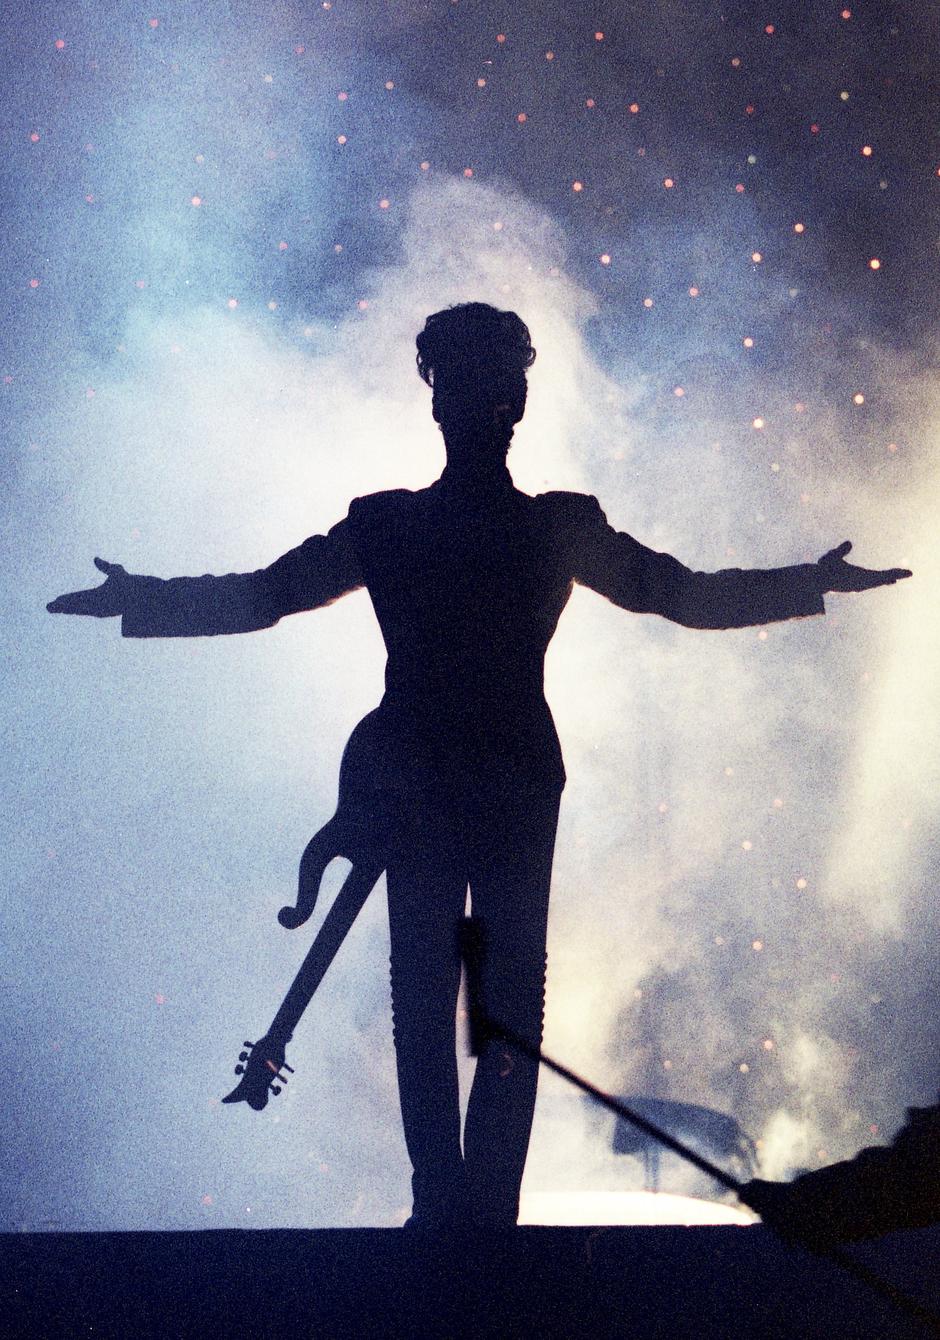 Prince | Author: Reuters/Pixsell